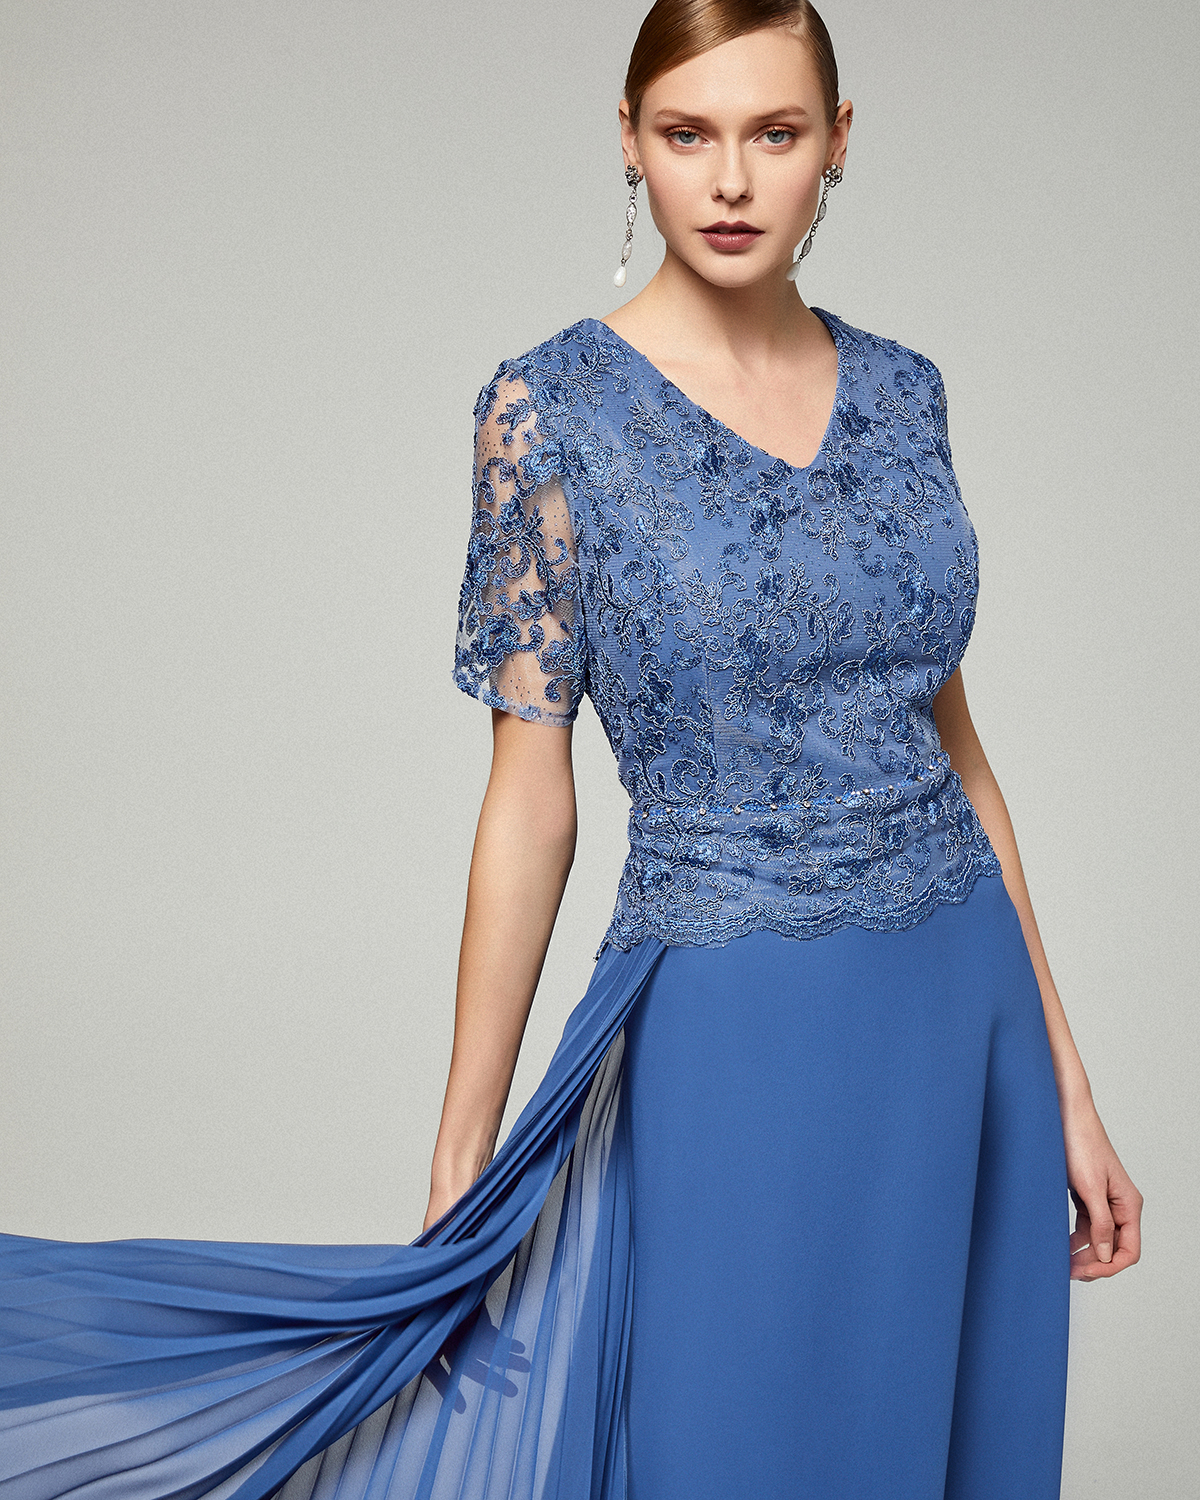 Long chiffon dress with  beaded lace top and short sleeves